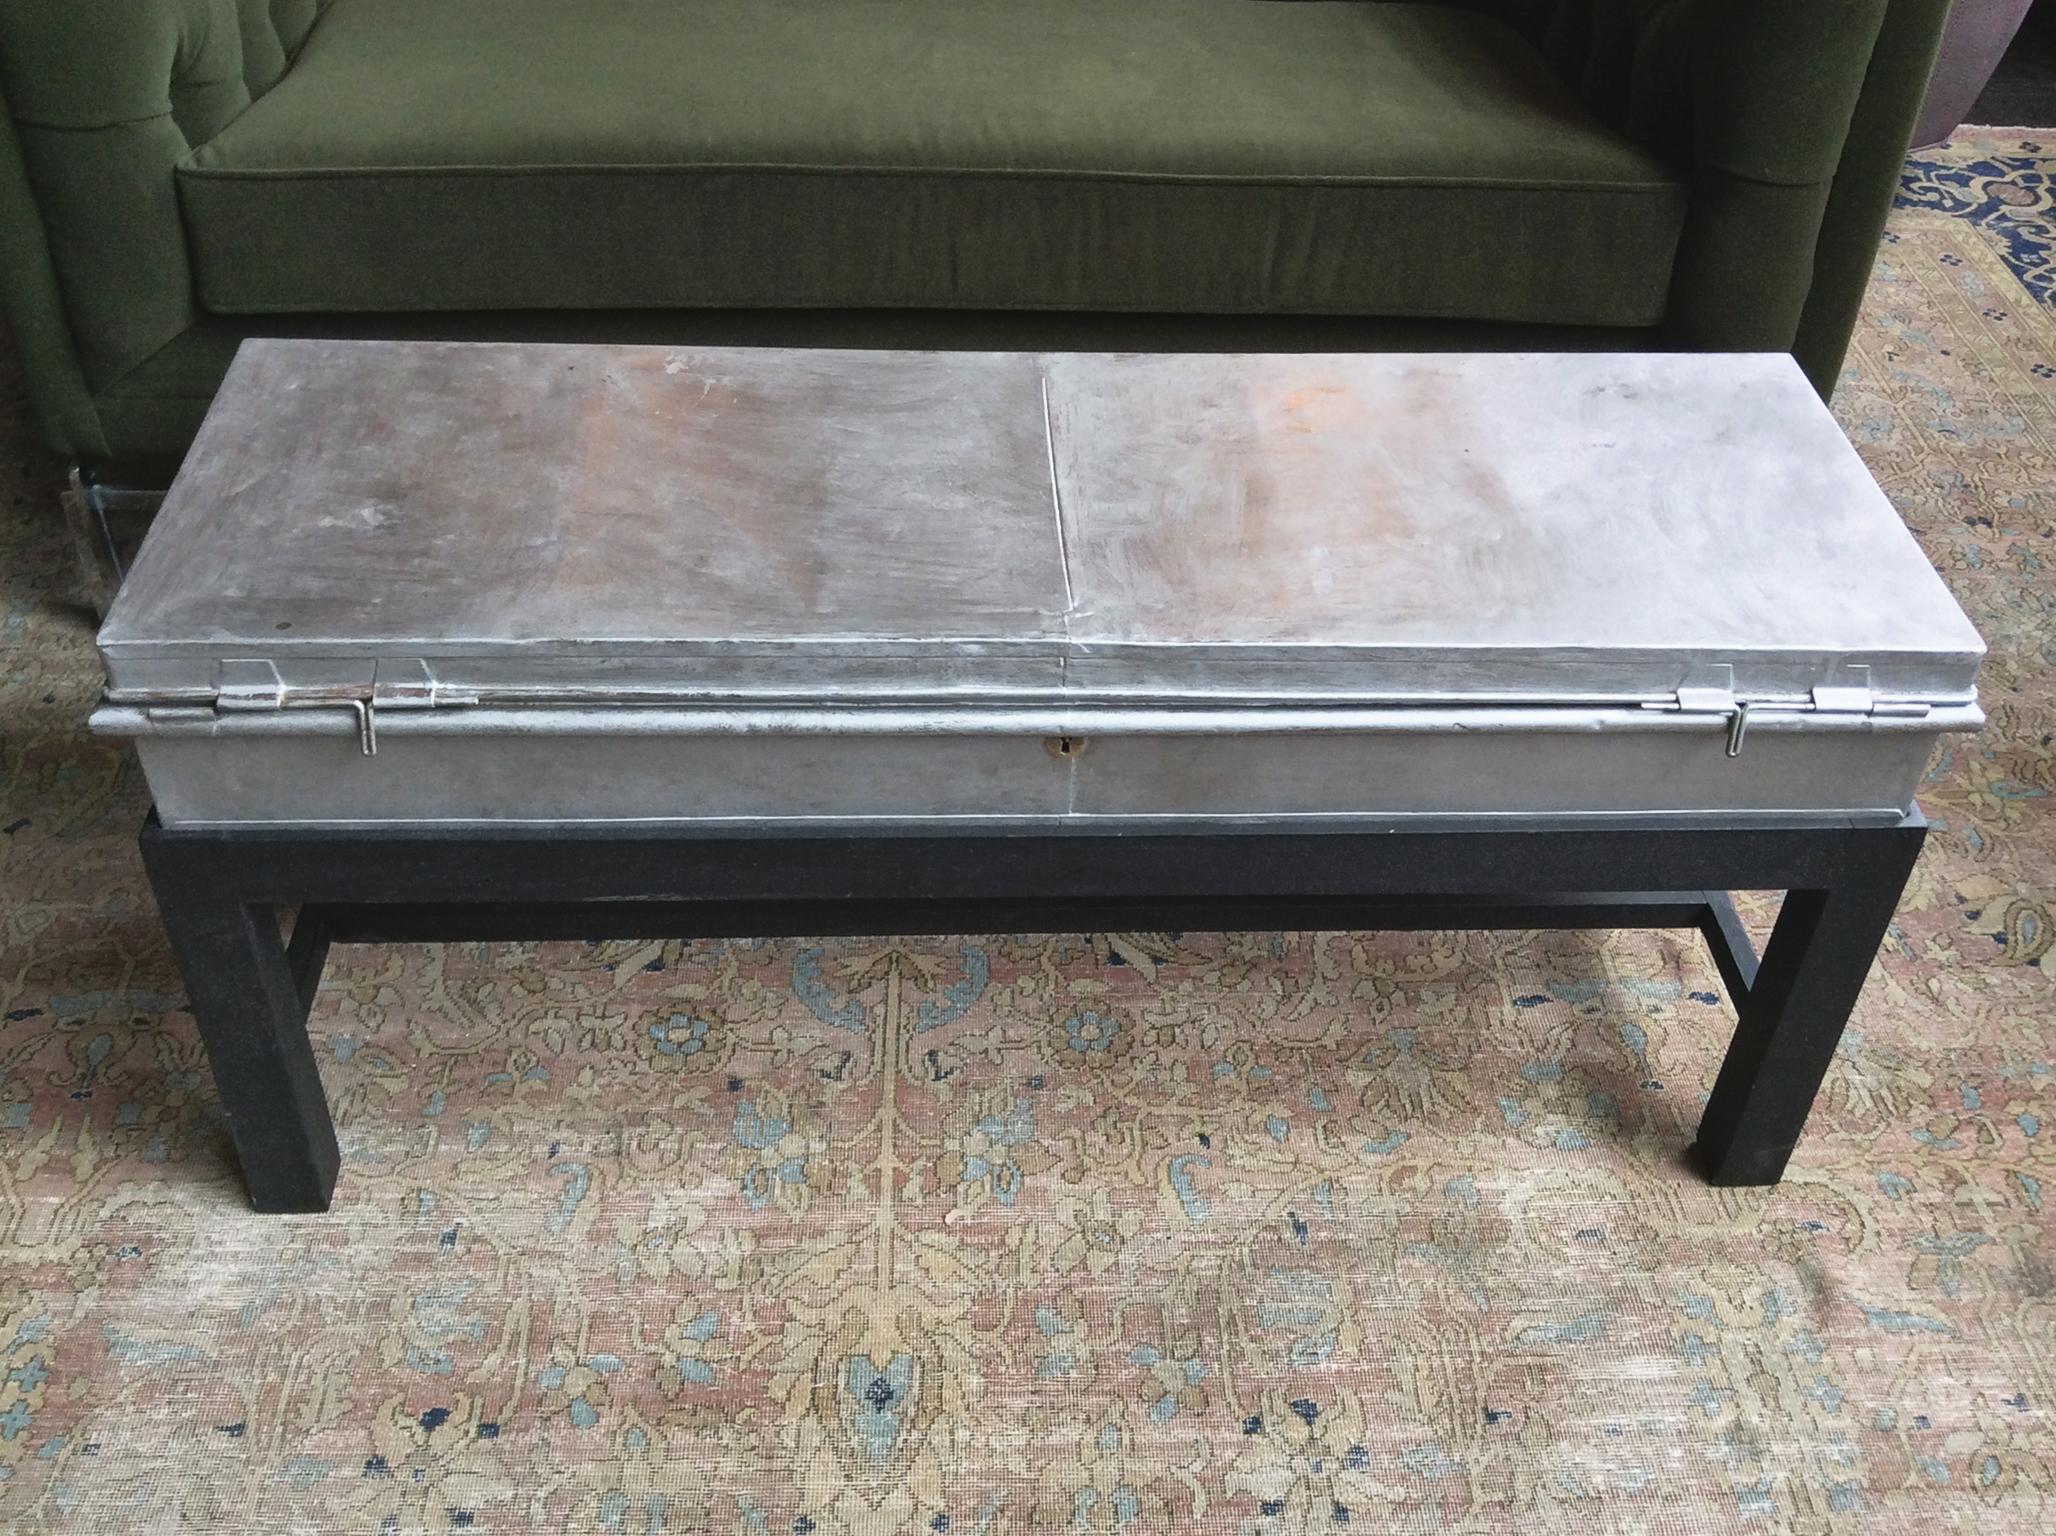 A versatile industrial coffee table comprised of a tin box top and a wooden base. Hardware includes a keyhole, two barrel bolts, and two handles at either end. A fog-white wash covers the metal, giving it a purposely weathered look. The box's hinged